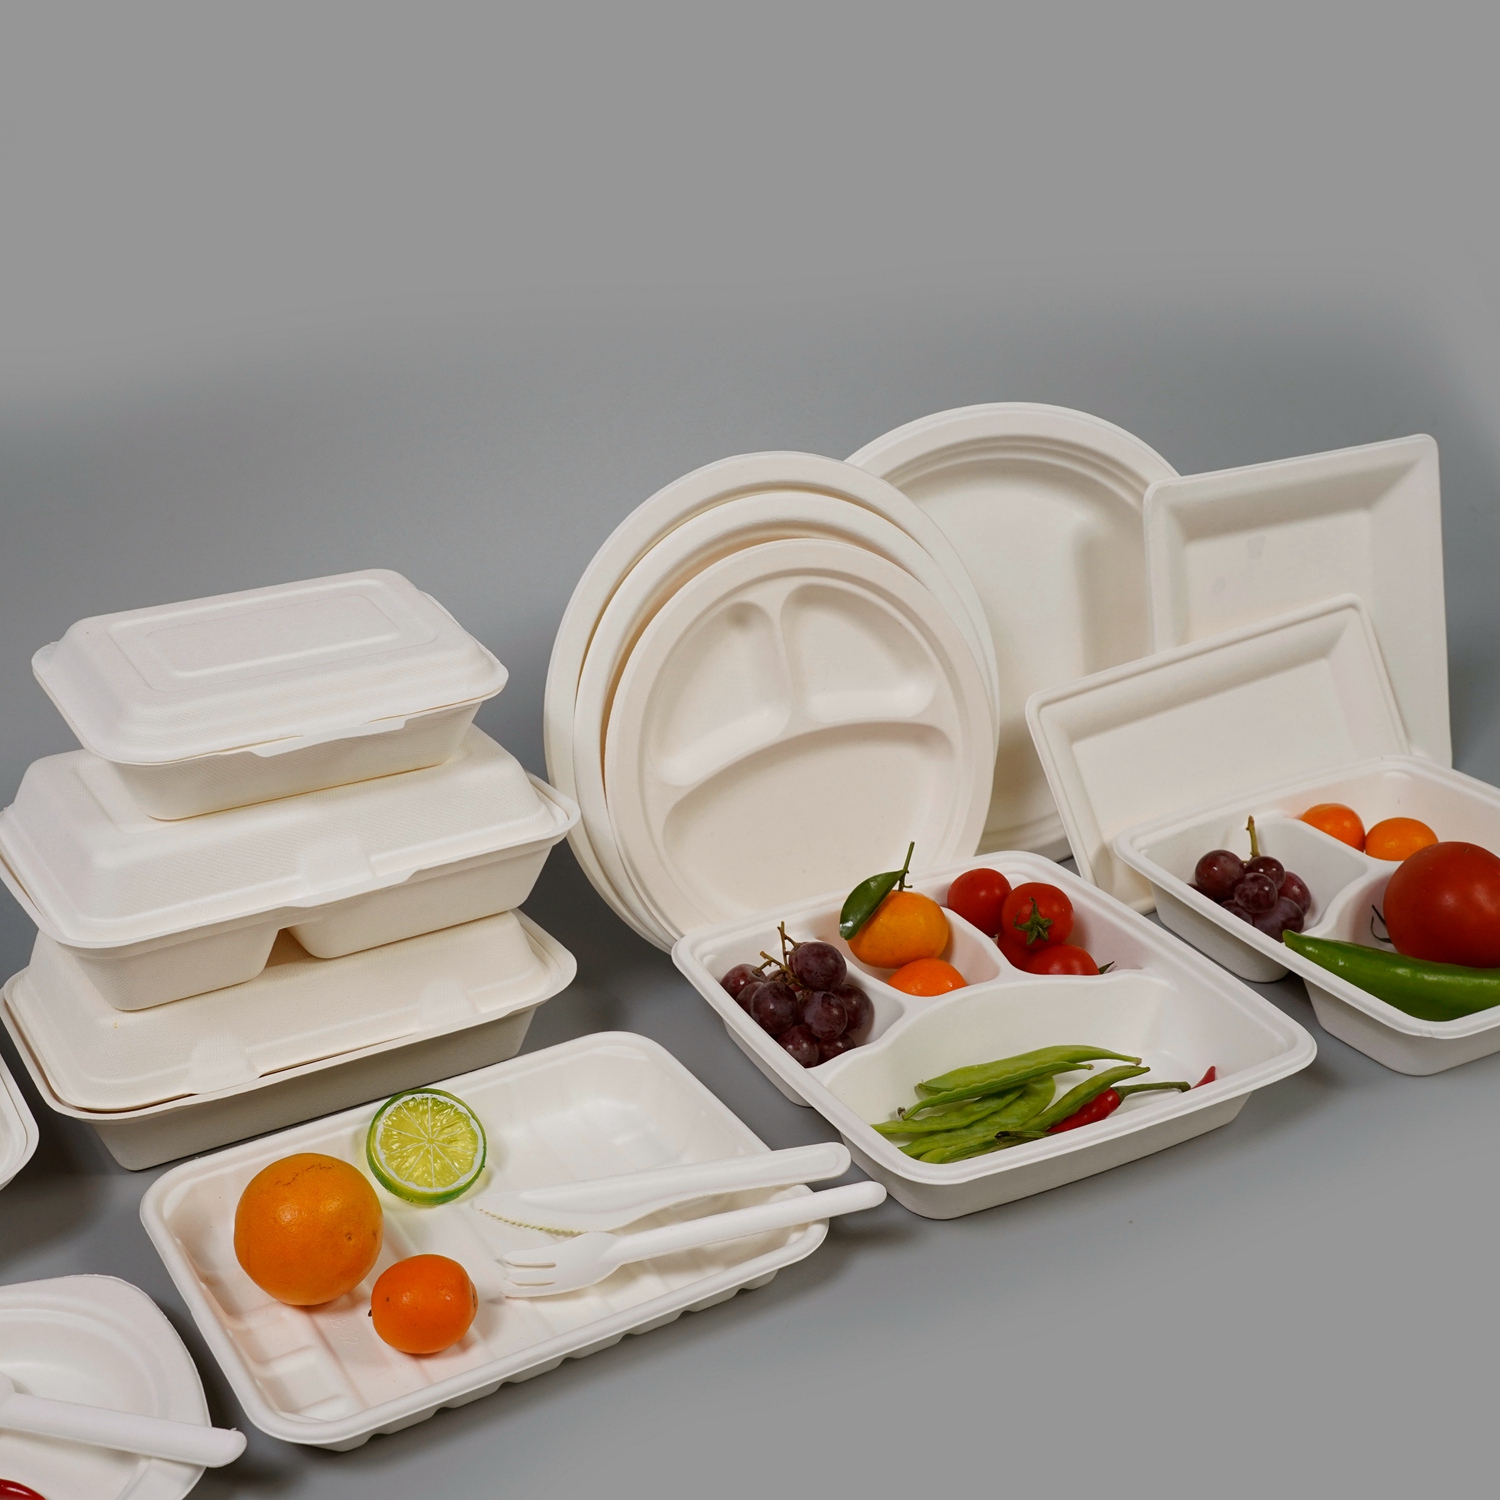 Why Choose Sugarcane Pulp Food Packaging? Sugarcane Food Container, Biodegradable Tableware, Biodegradable Food Container, Disposable Tableware, Disposable Products